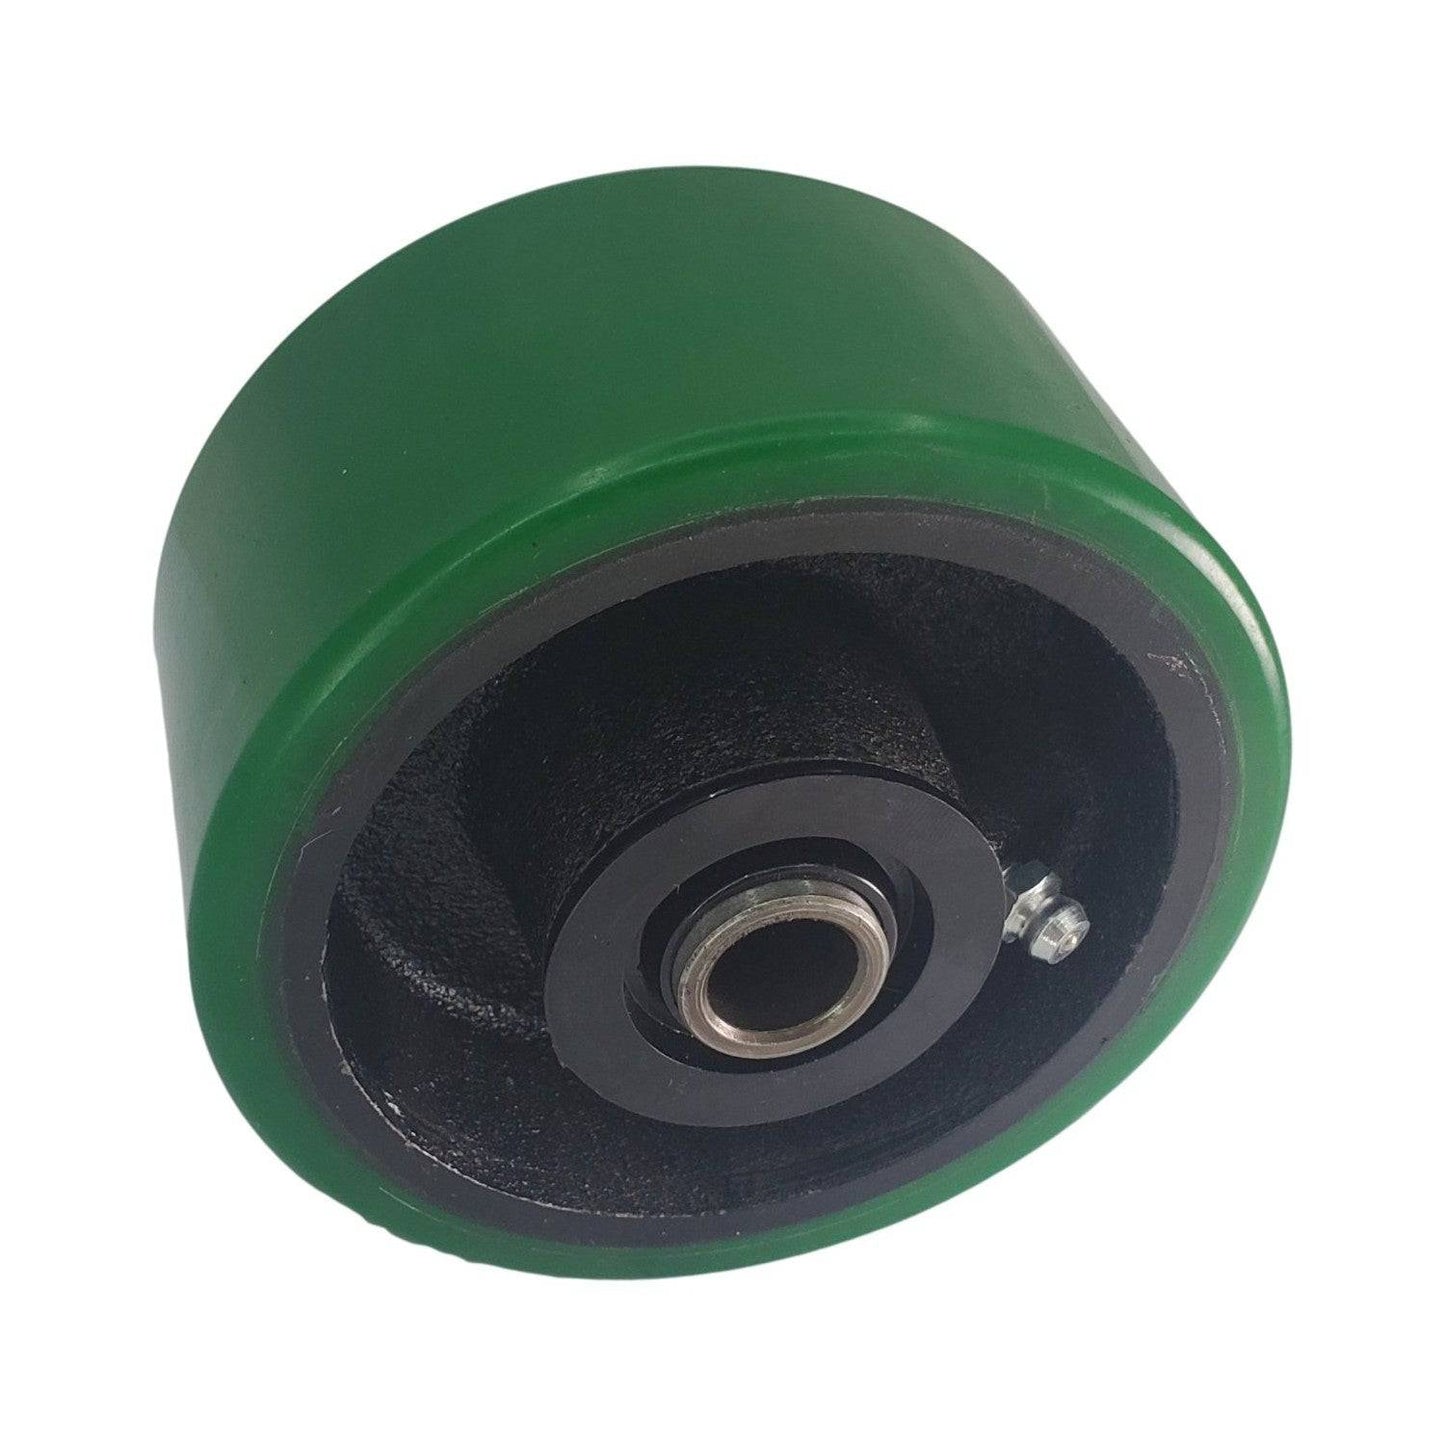 4" x 2" Polyon Cast Wheel - 800 lbs. Capacity - Durable Superior Casters